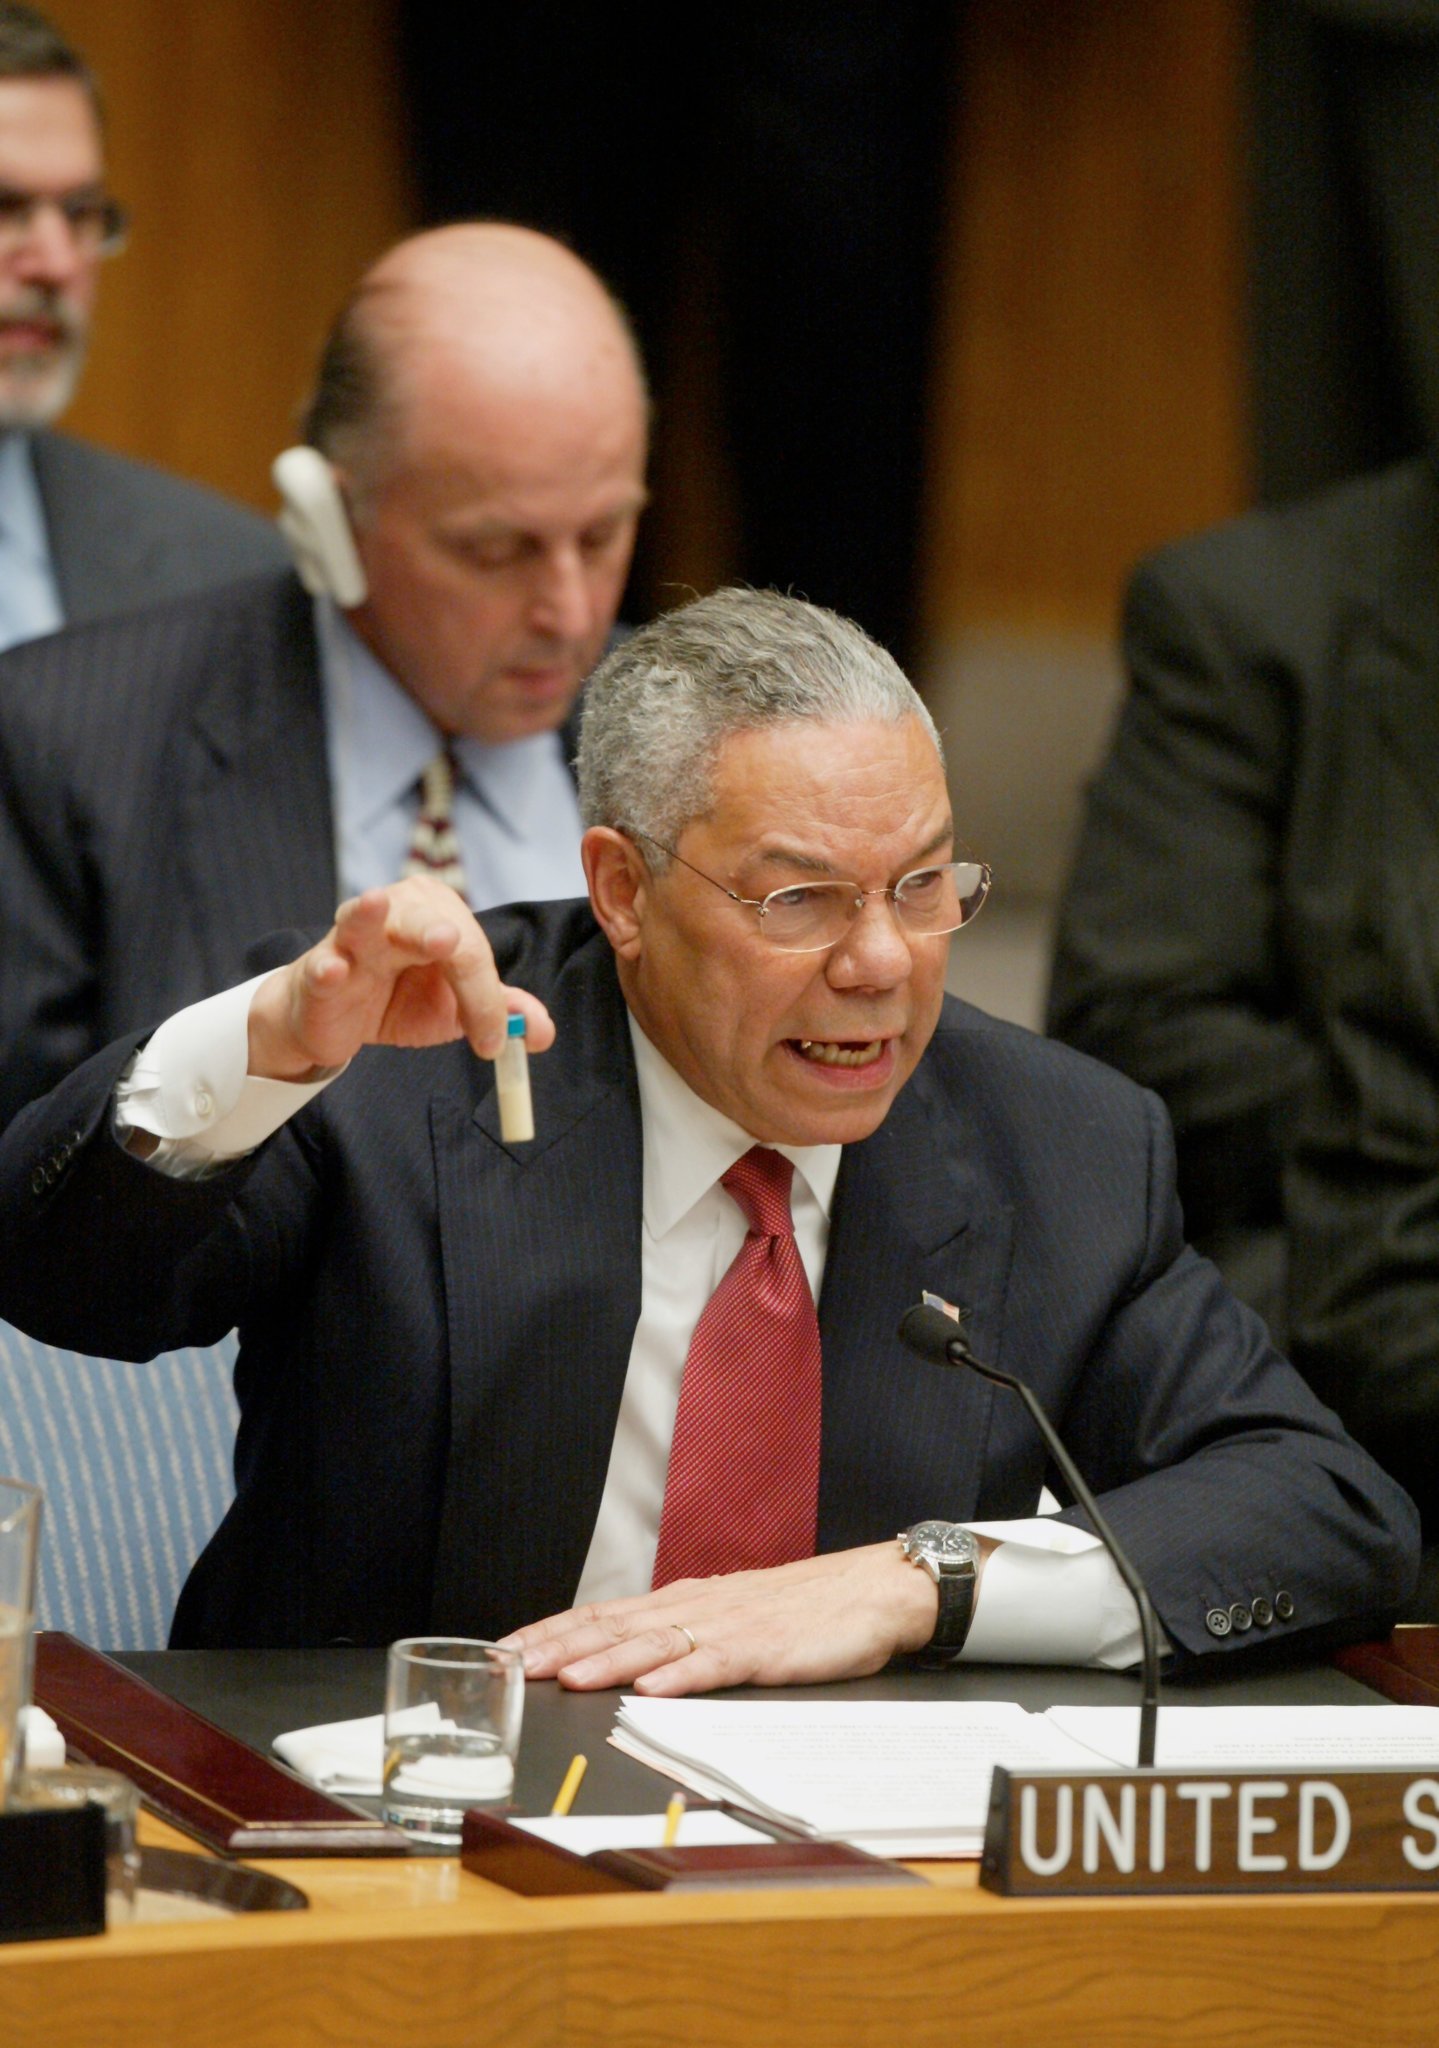 US again lying about basis for war: Colin Powell's former aide